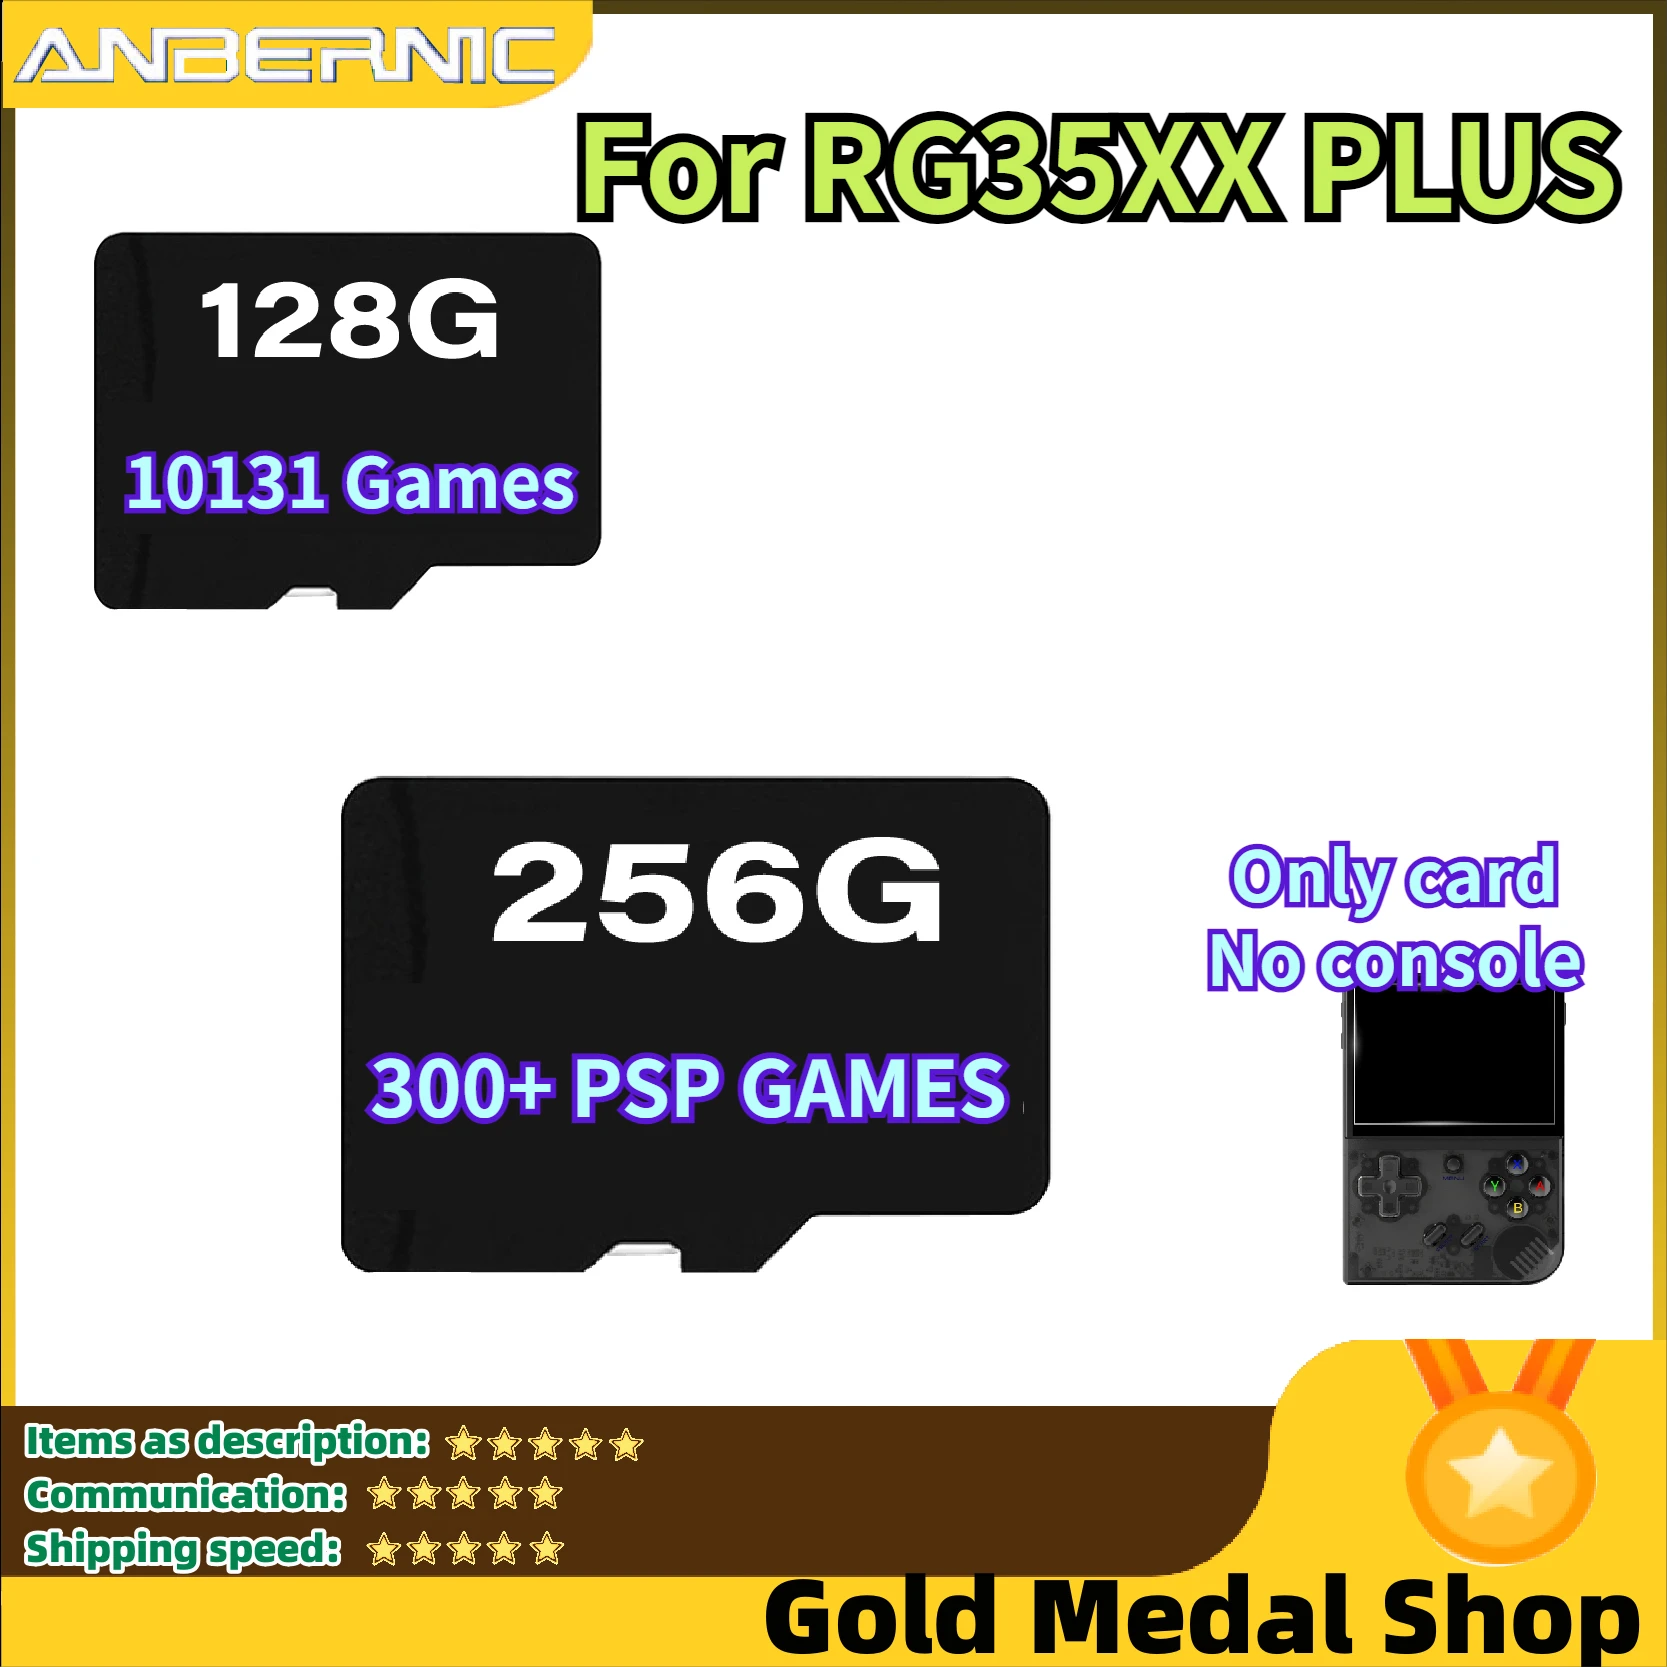 

ANBERNIC RG35XX PLUS 256GB TF Card Preloaded Games Memory Card 300+ PSP Games Retro Handheld Game PSP DC SS PS1 NDS